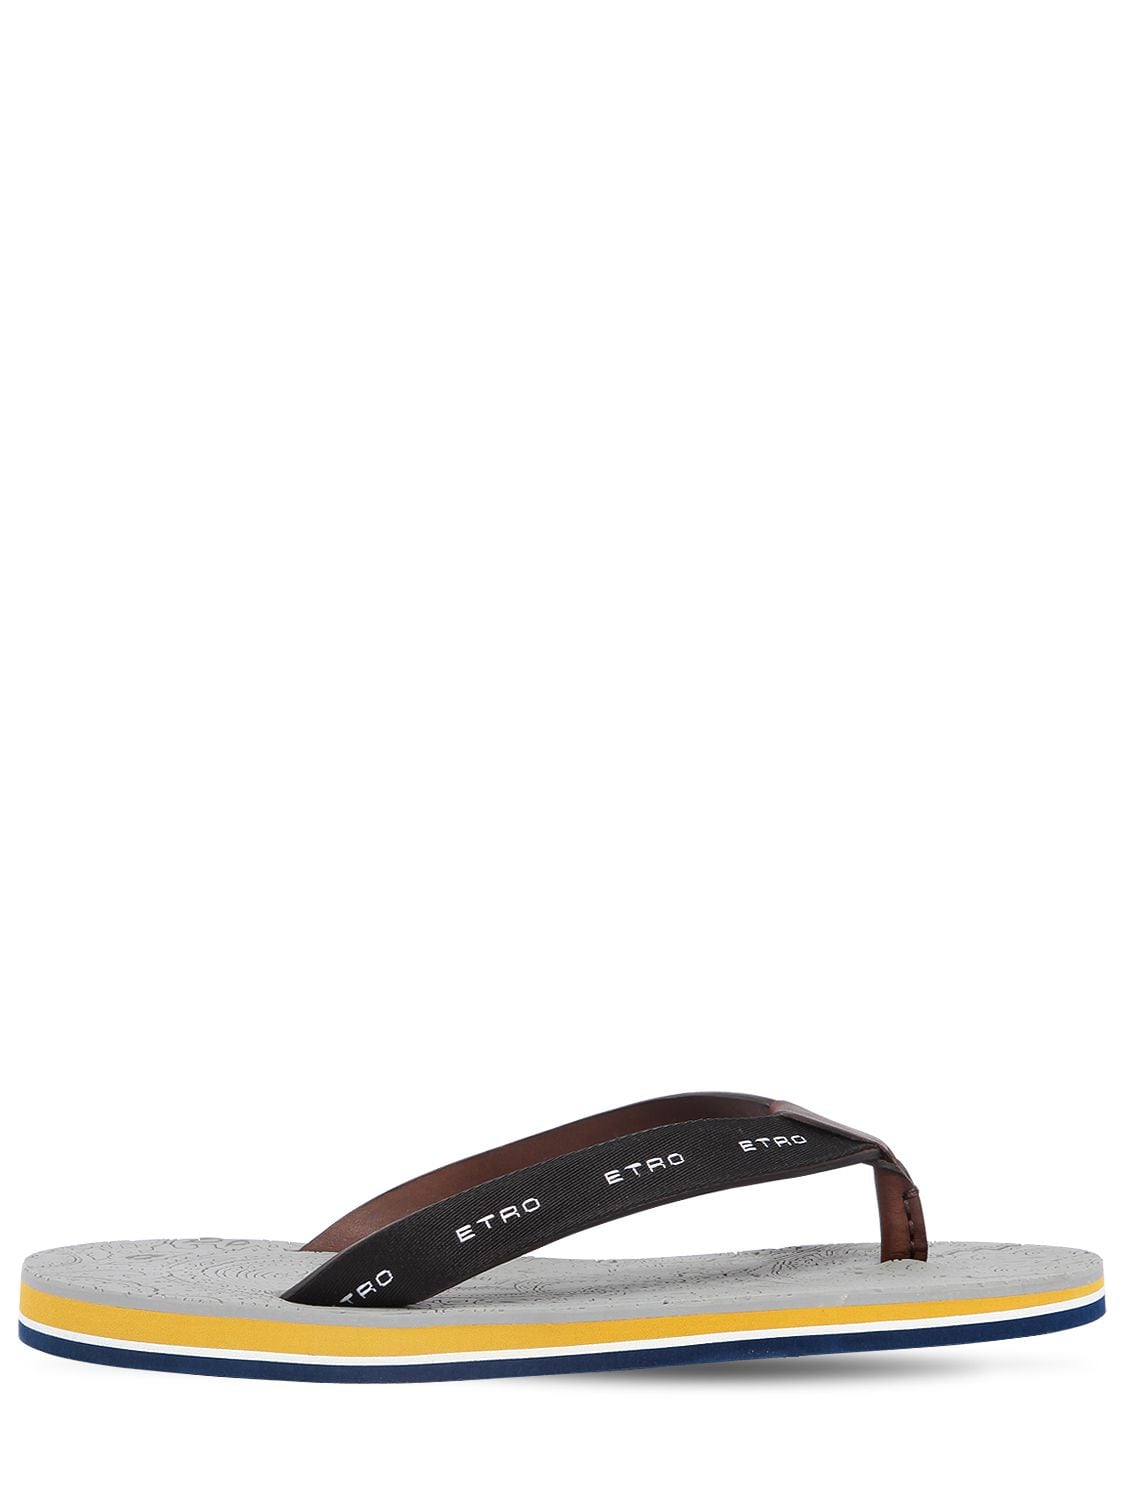 Etro Leather Flip Flops W/ Paisley Insole In Multicolor